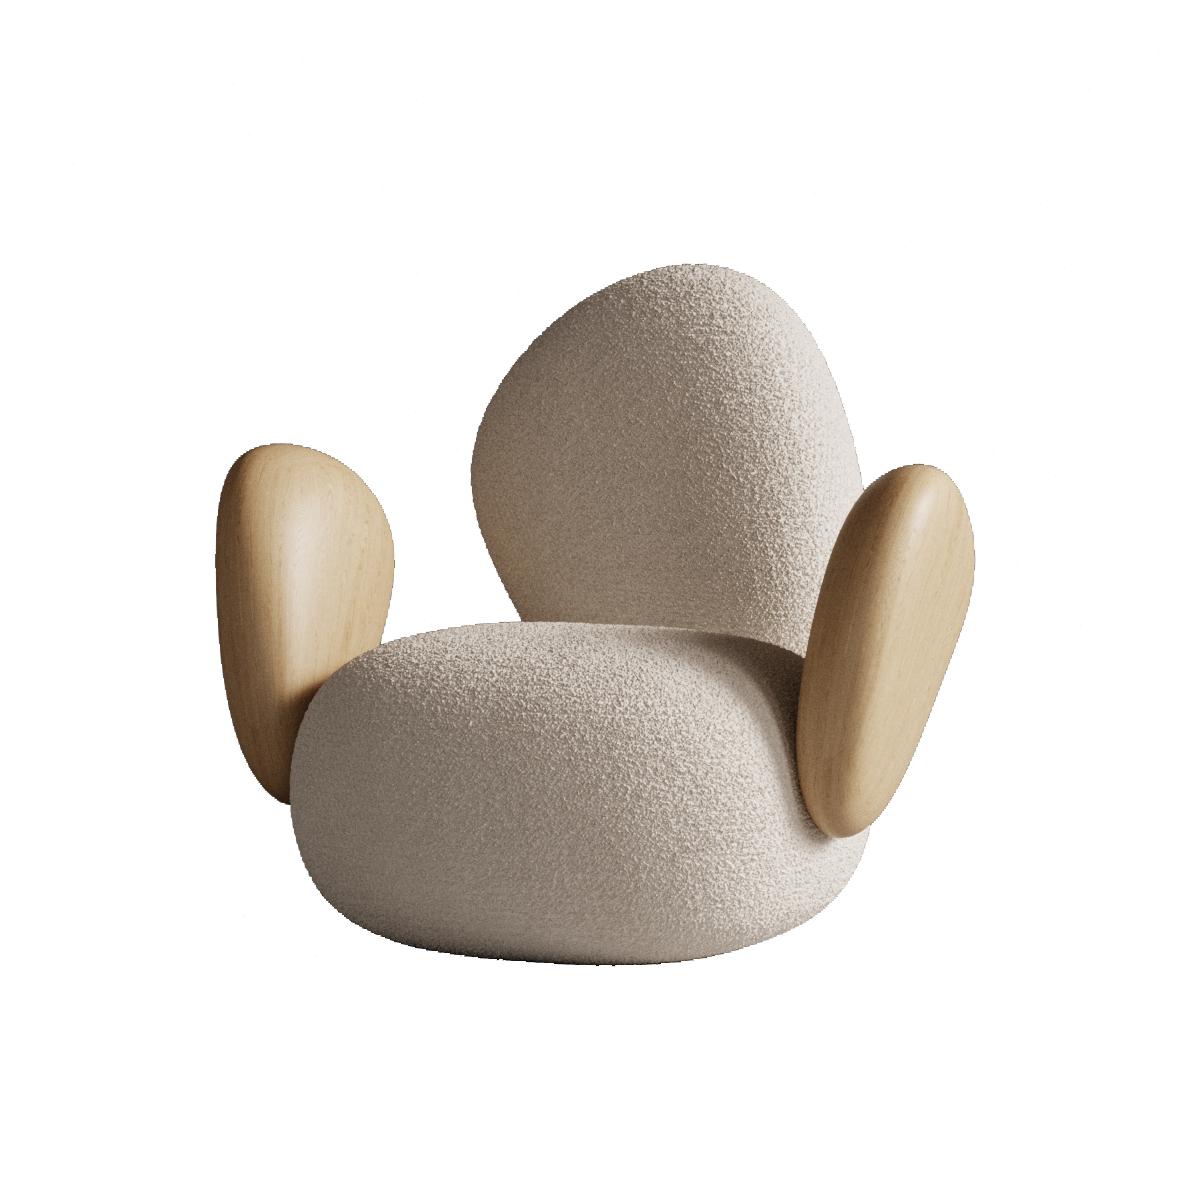 Stone Chair by Plyus Design
Dimensions: D 81 x W 115 x H 88 cm
Materials:  Wood, HR foam, polyester wadding, fabric upholstery.



PLYUS Furniture creates pieces in collectible design segment. We create modern, ergonomic furniture in a minimalist